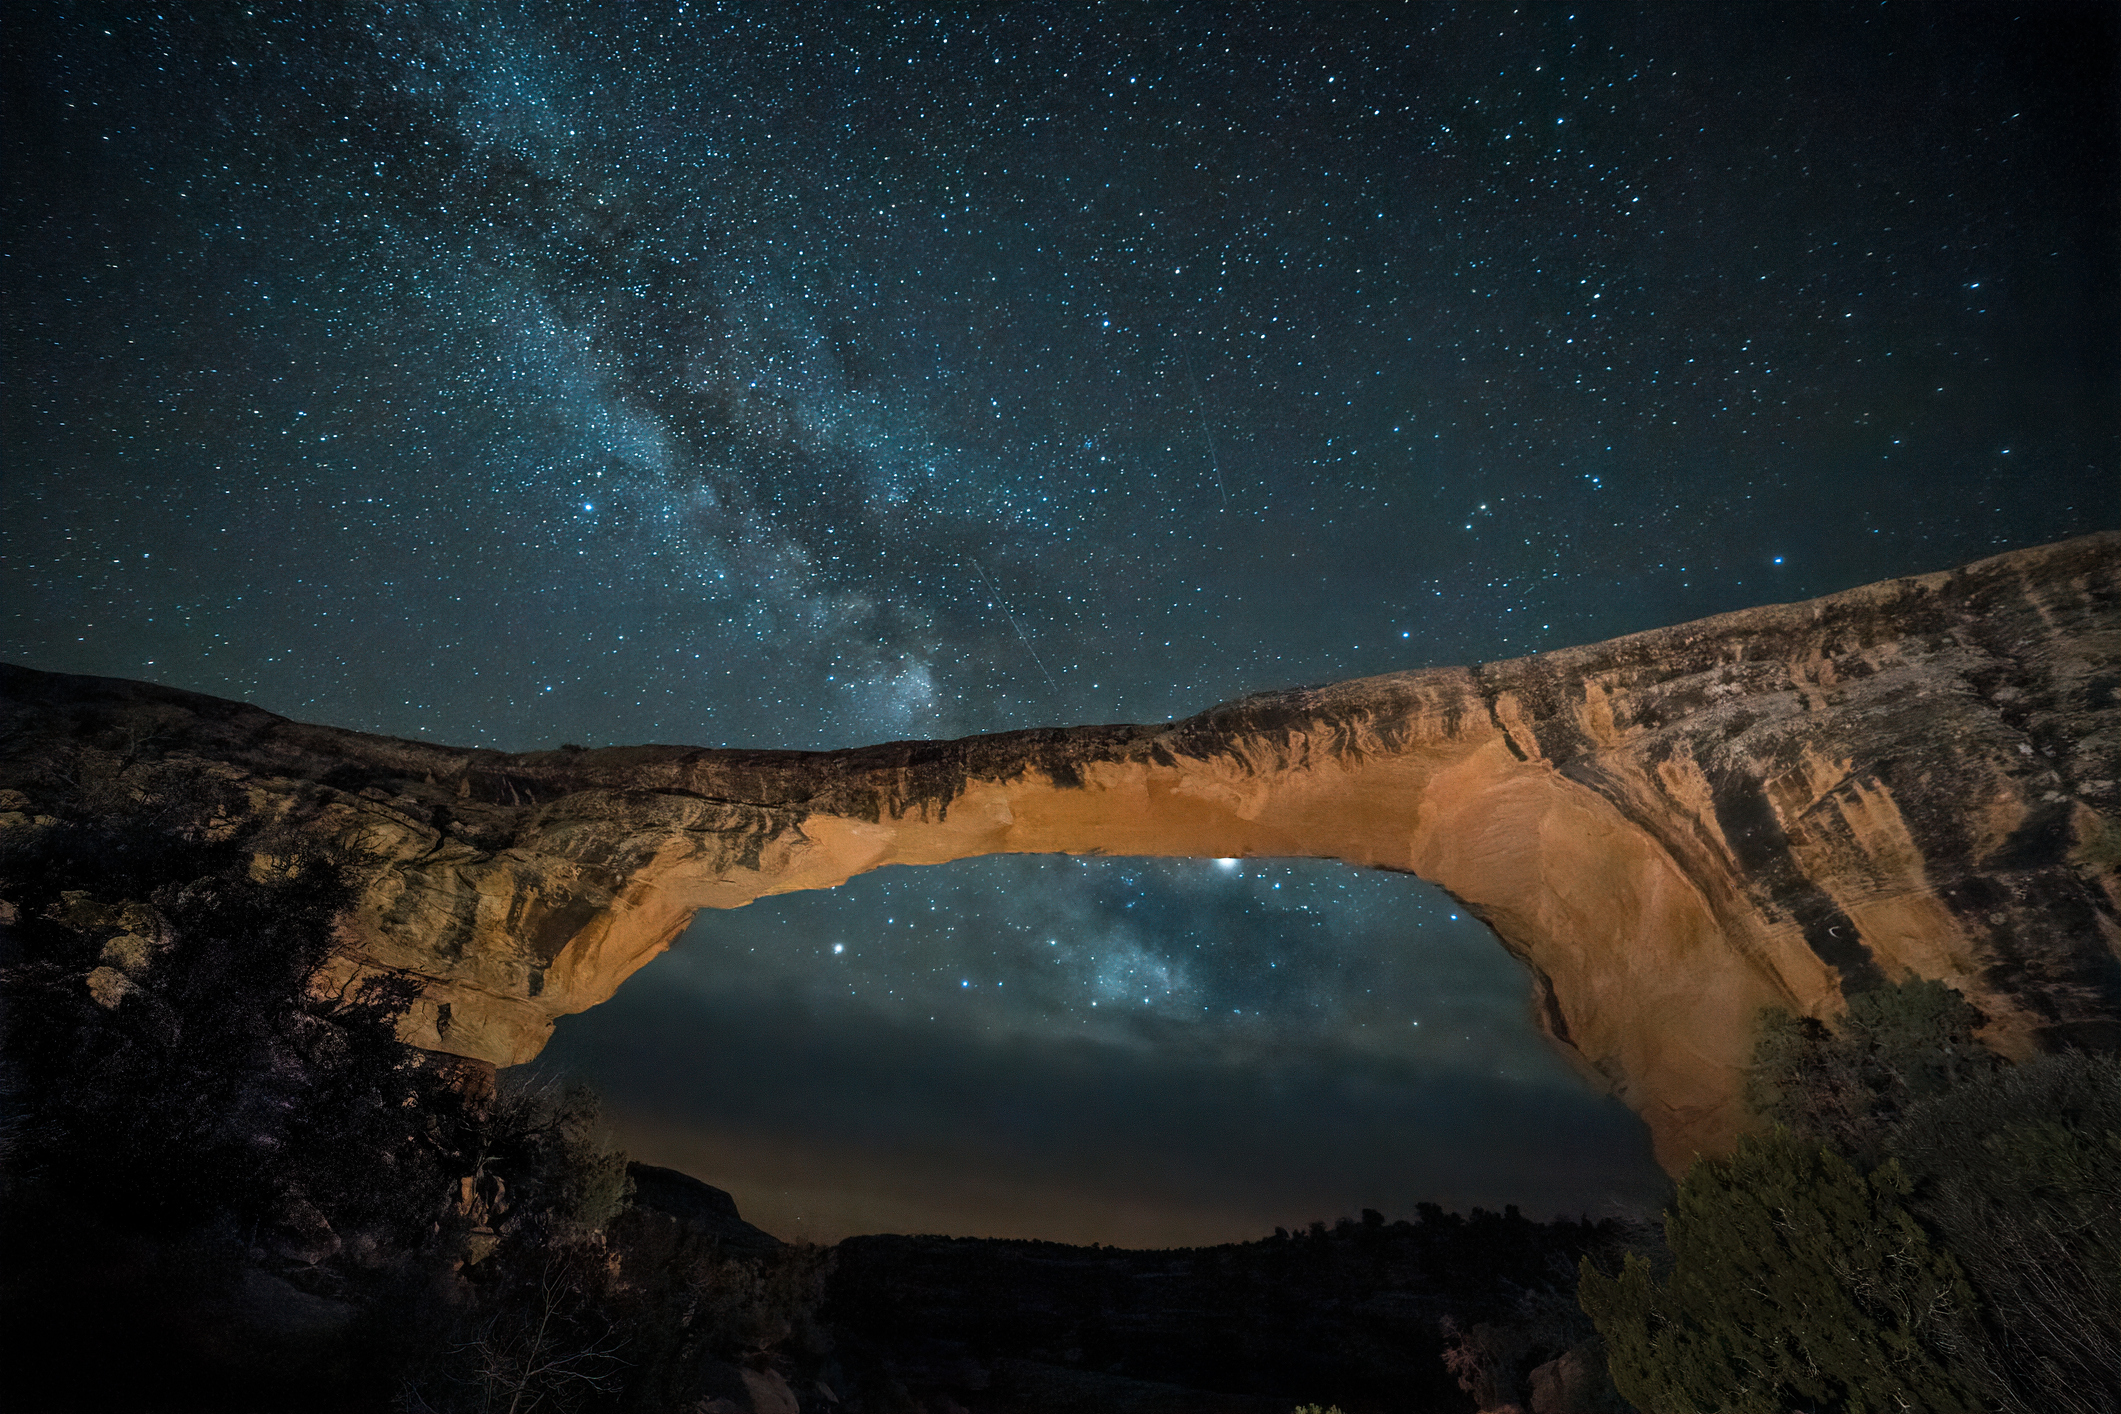 Large rocky bridge formation with the milky way in the background.